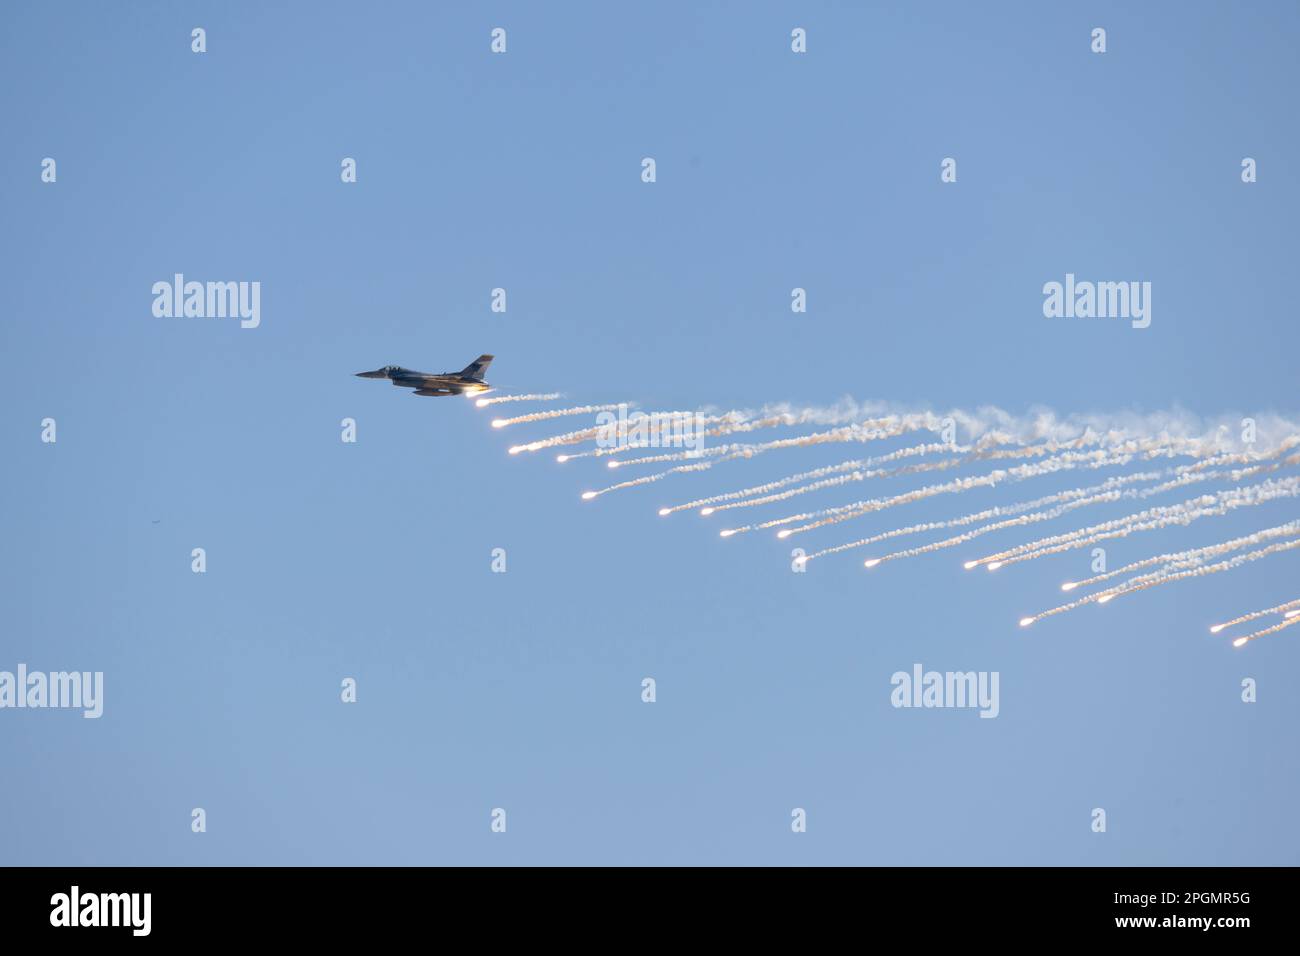 Las Vegas, NV - November 6, 2022: F-16 Fighter Jet Drops Flares During a Demo at the Aviation Nation airshow at Nellis AFB. Stock Photo